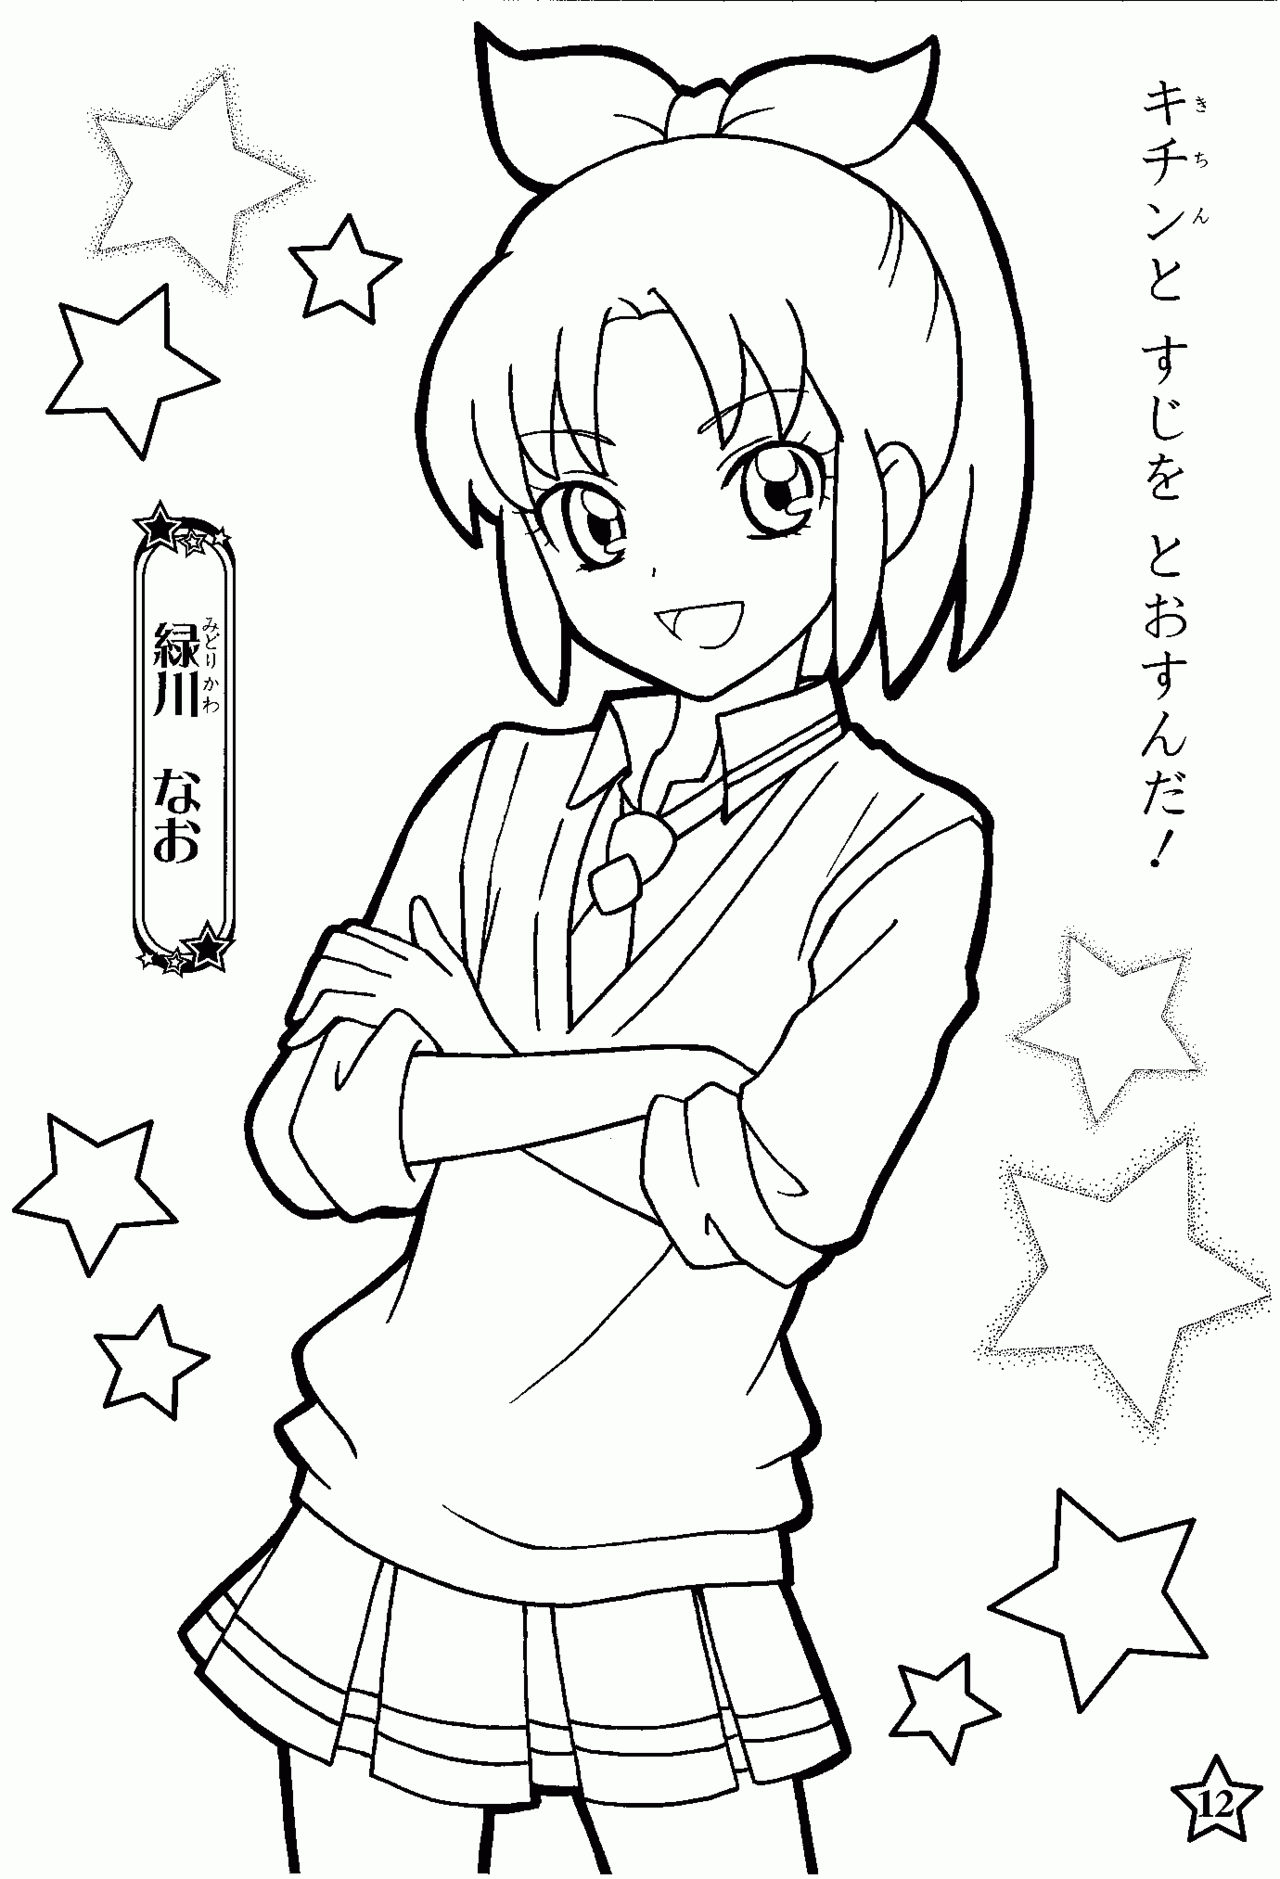 Anime Coloring Pages To Print 556457 - VoteForVerde.com